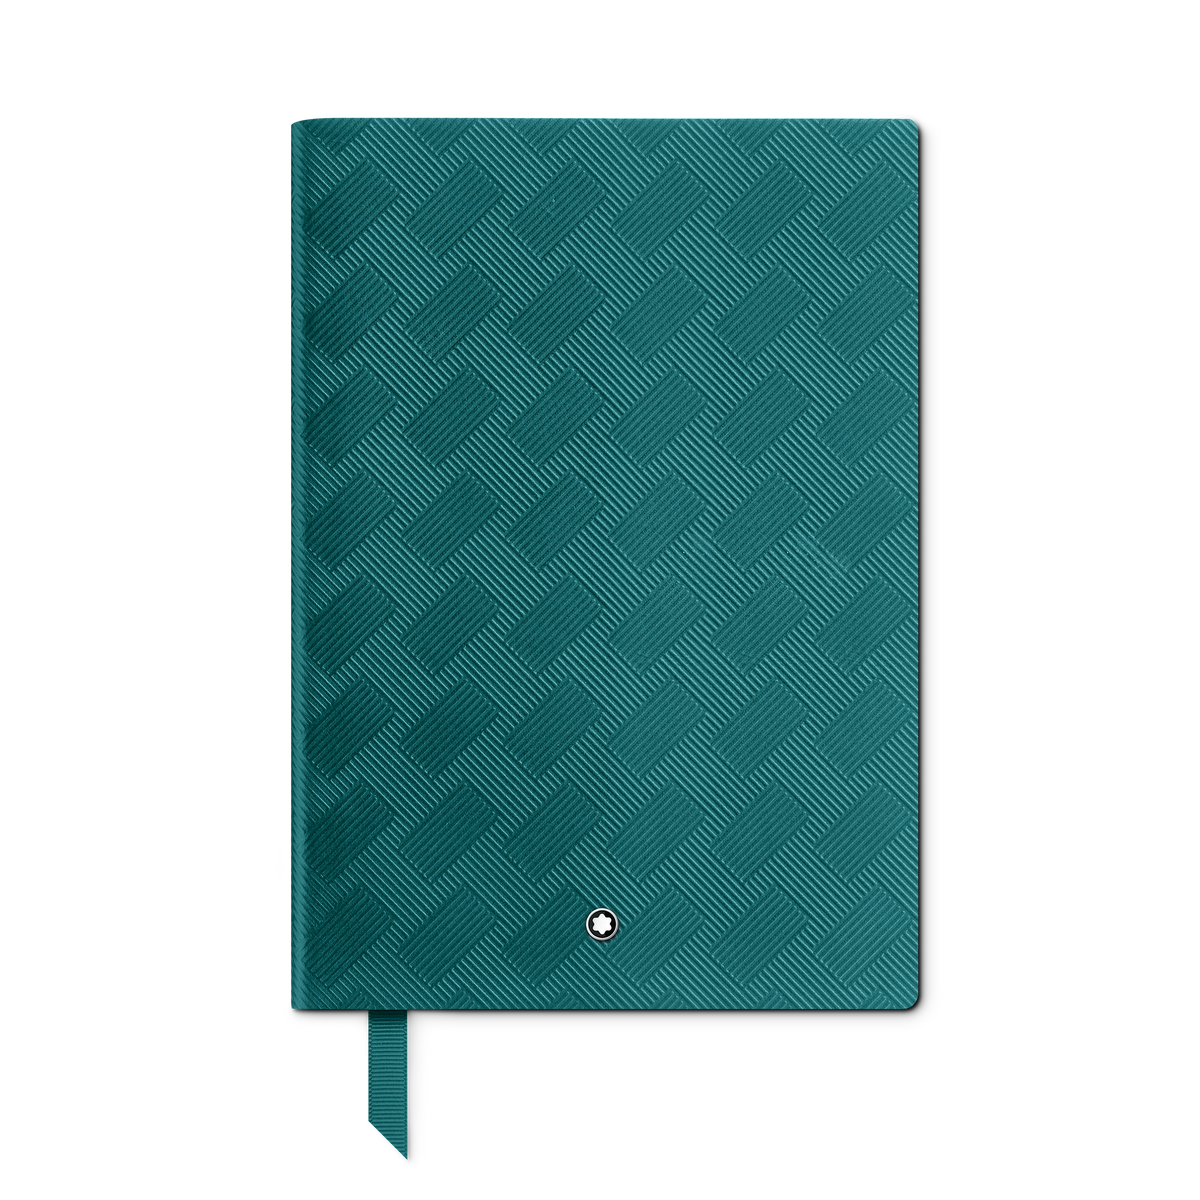 Notebook #146 small, Montblanc Extreme 3.0 Collection, fern blue lined